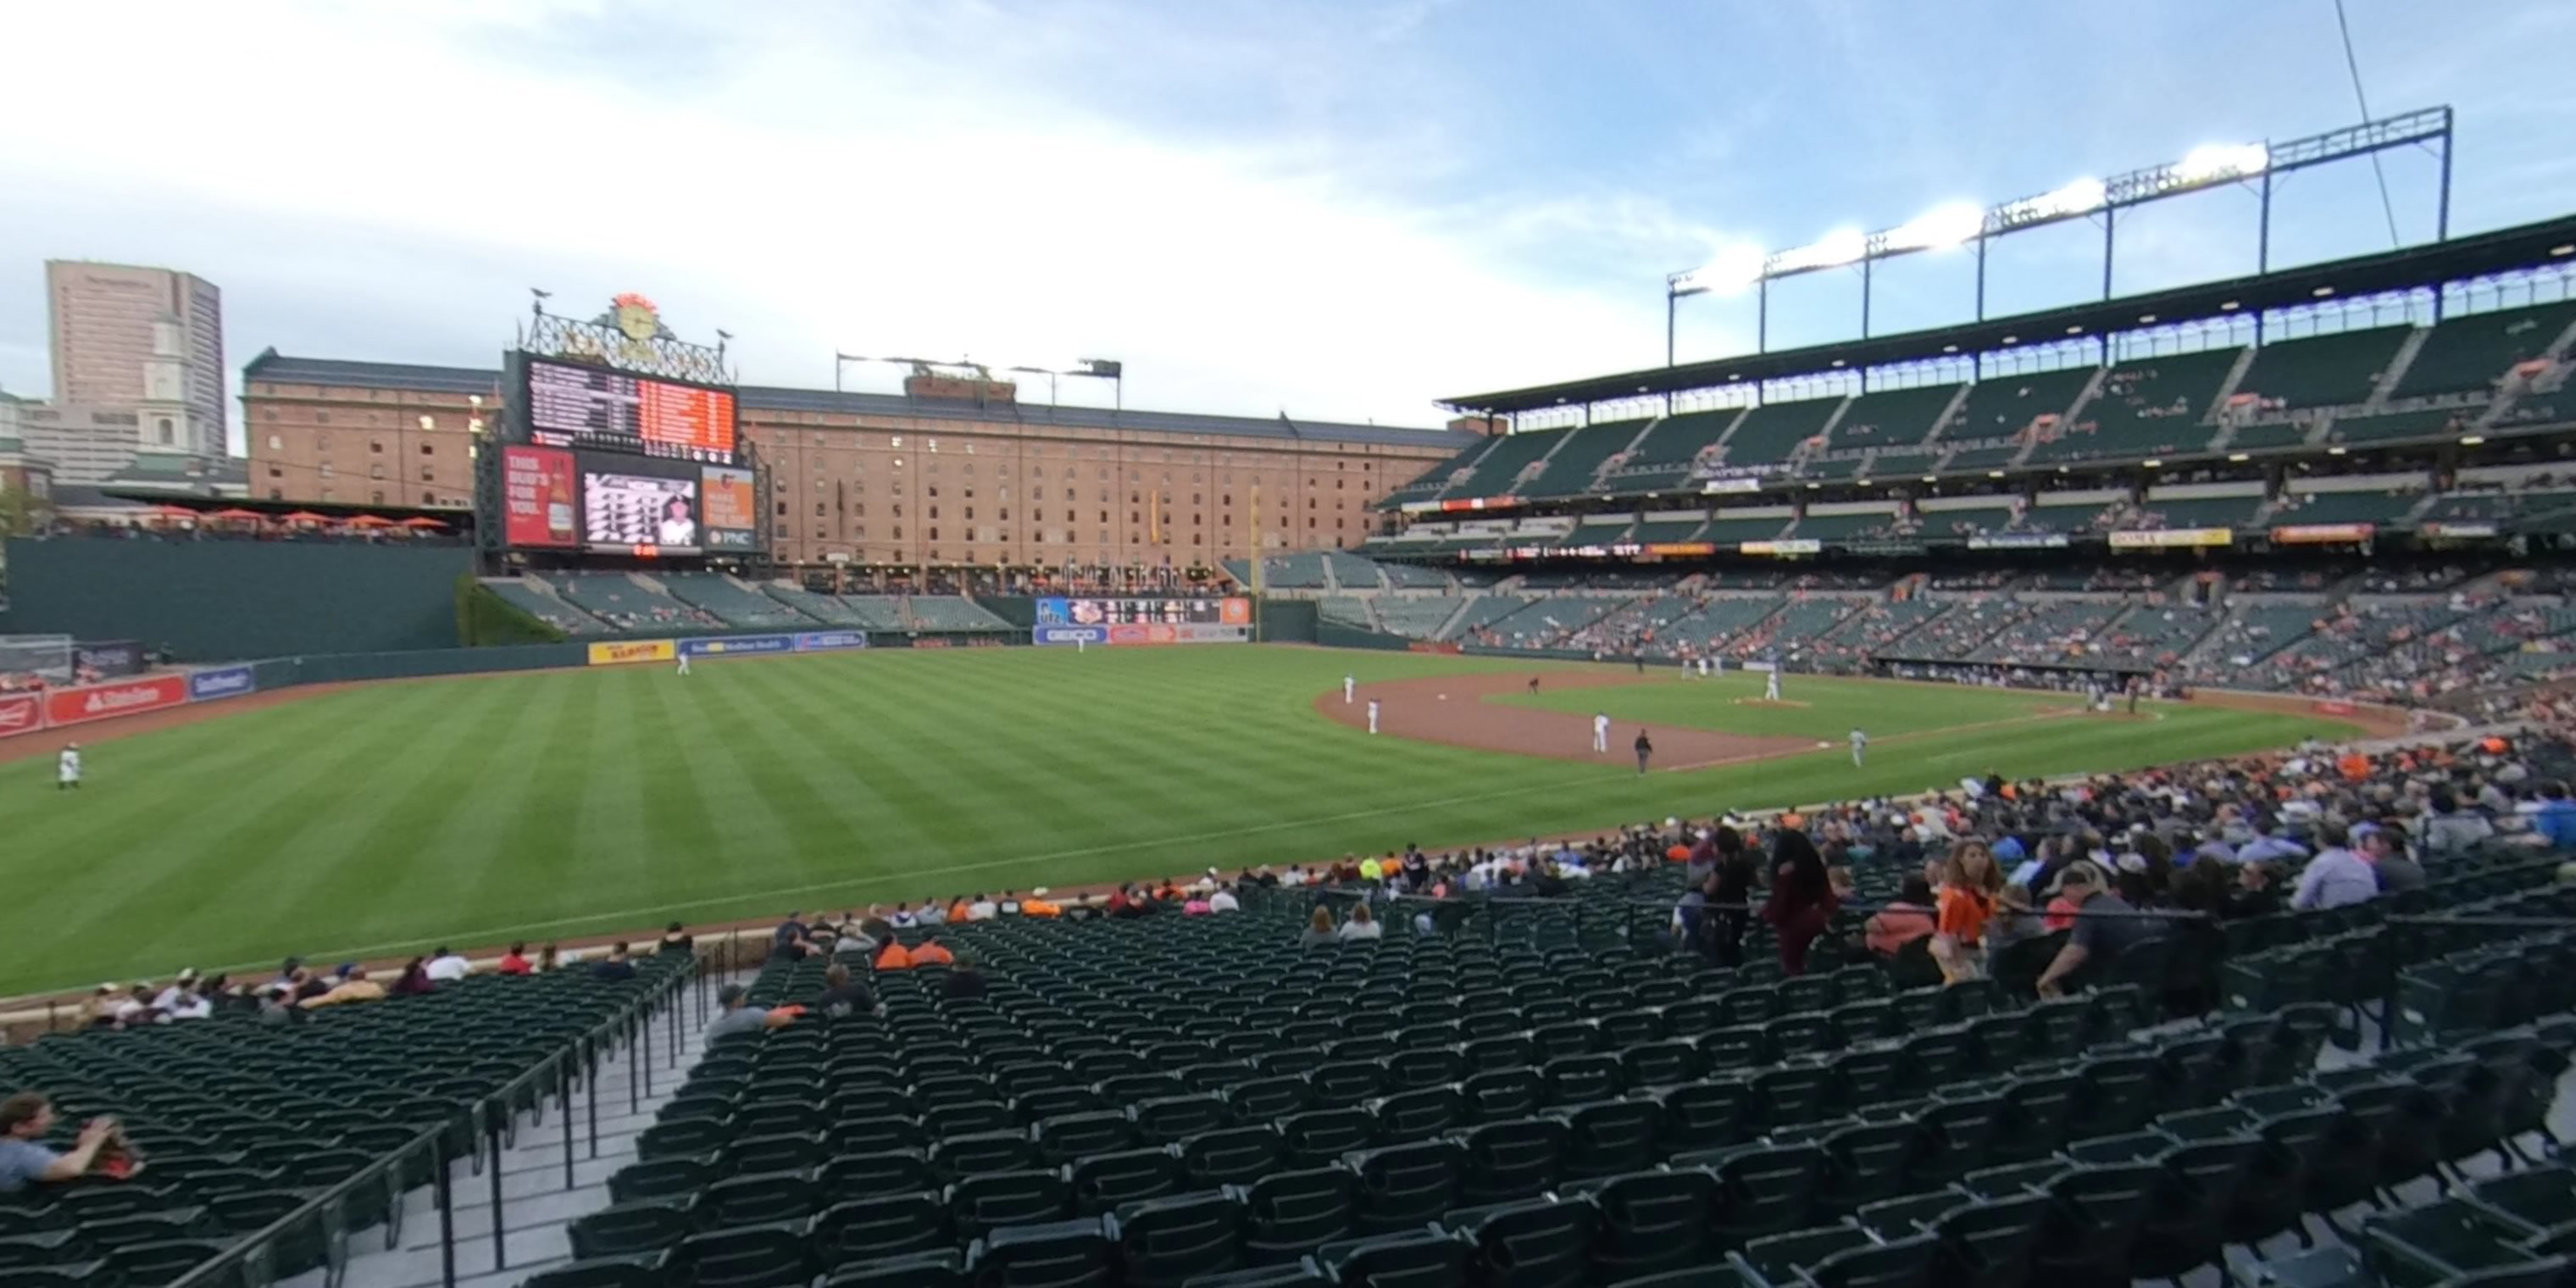 section 64 panoramic seat view  - oriole park